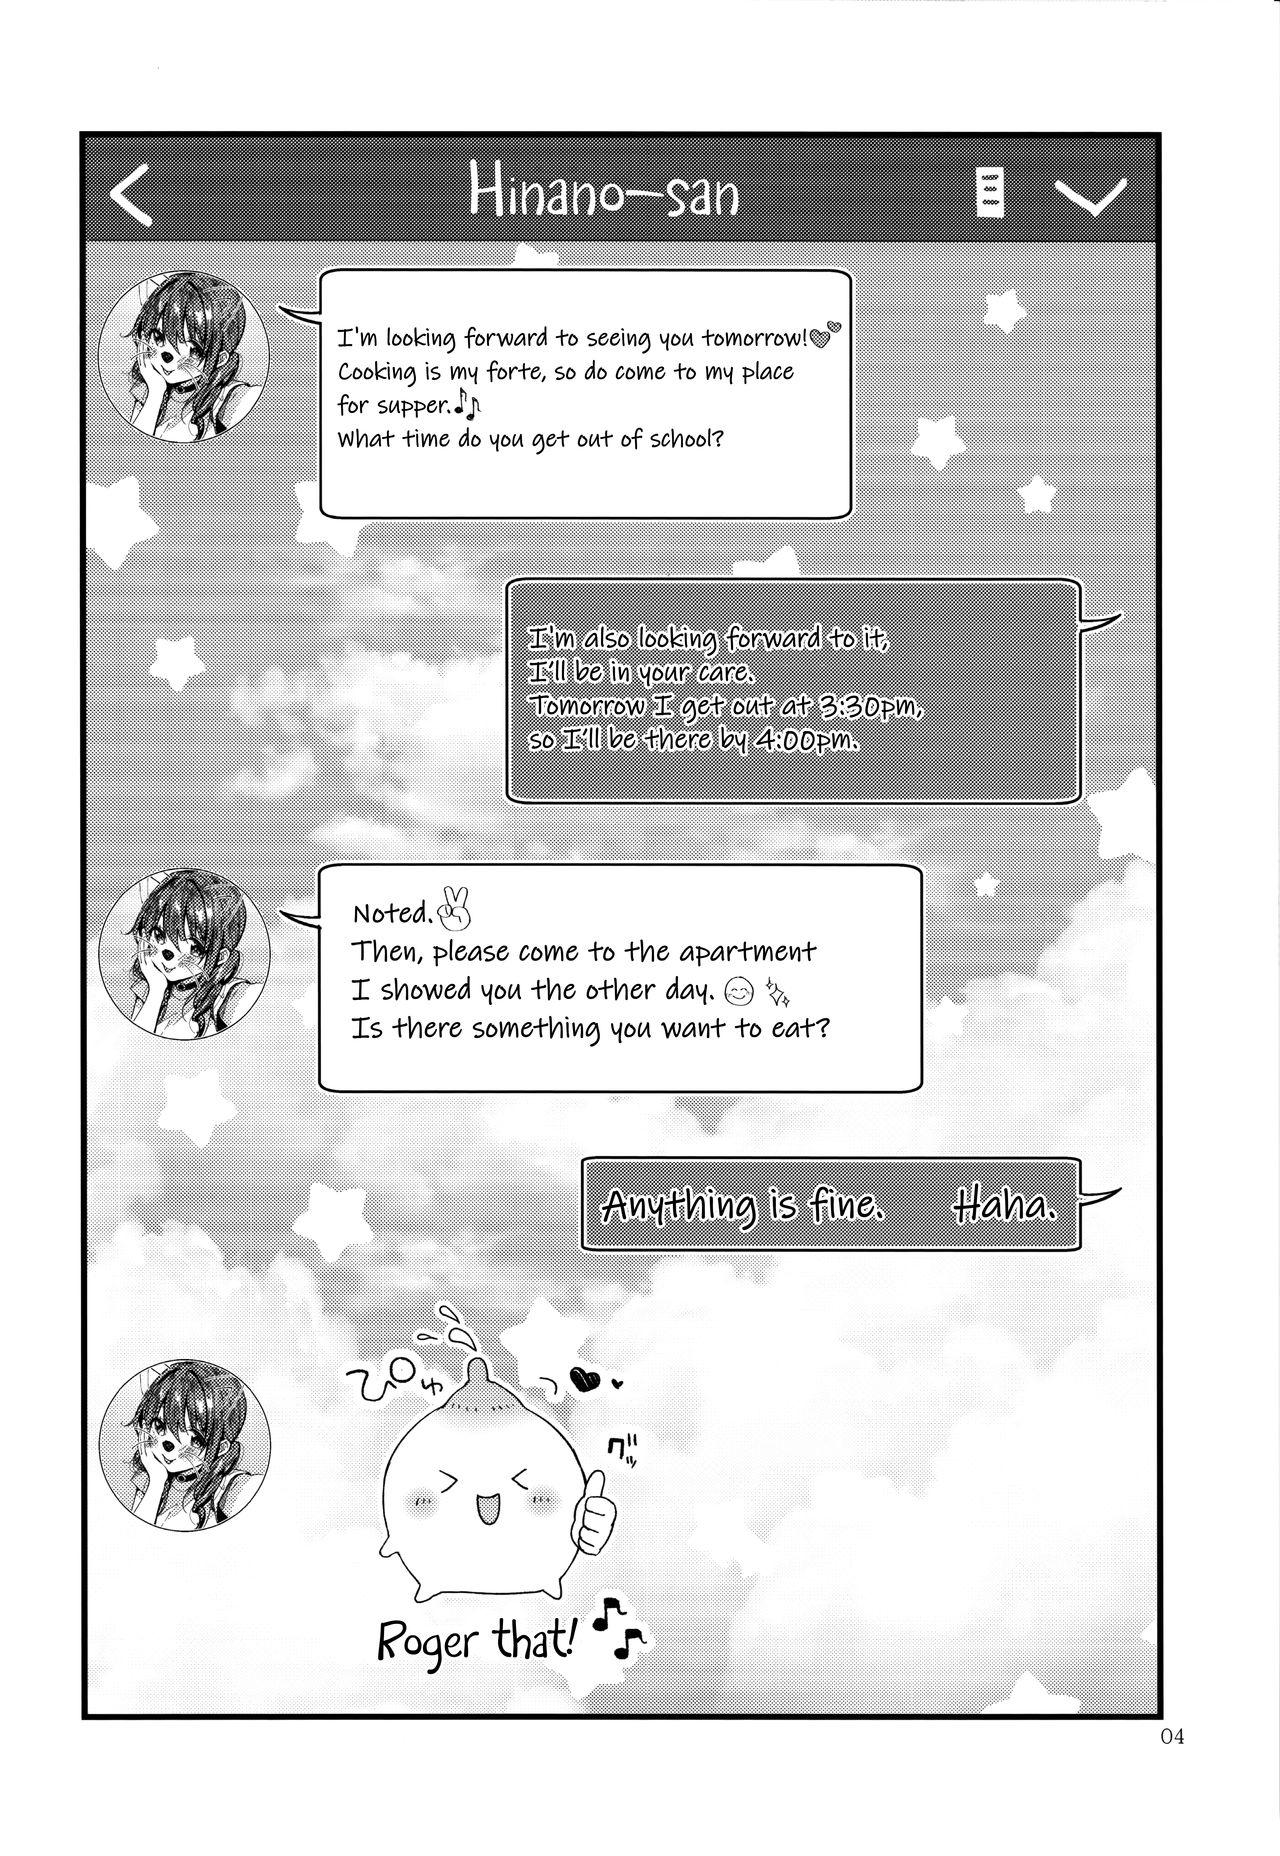 Ducha Onekatsu no Susume | The Big Sister Experience Recommendation - Original Flashing - Page 4